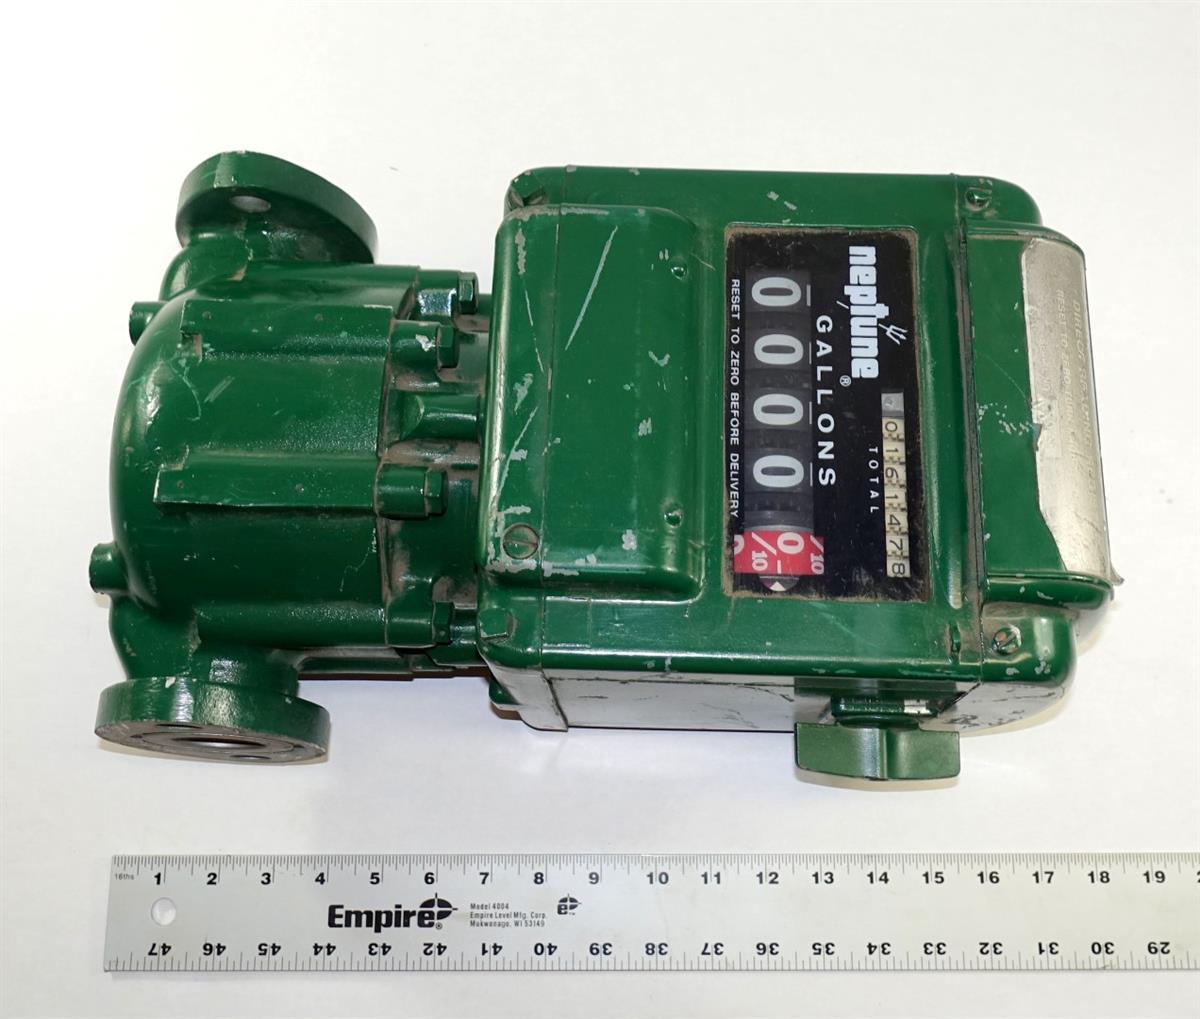 M35-668 | 6680-00-930-5955 Neptune Fuel Meter Model 431 for M49A2C Fuel Truck USED (2).JPG